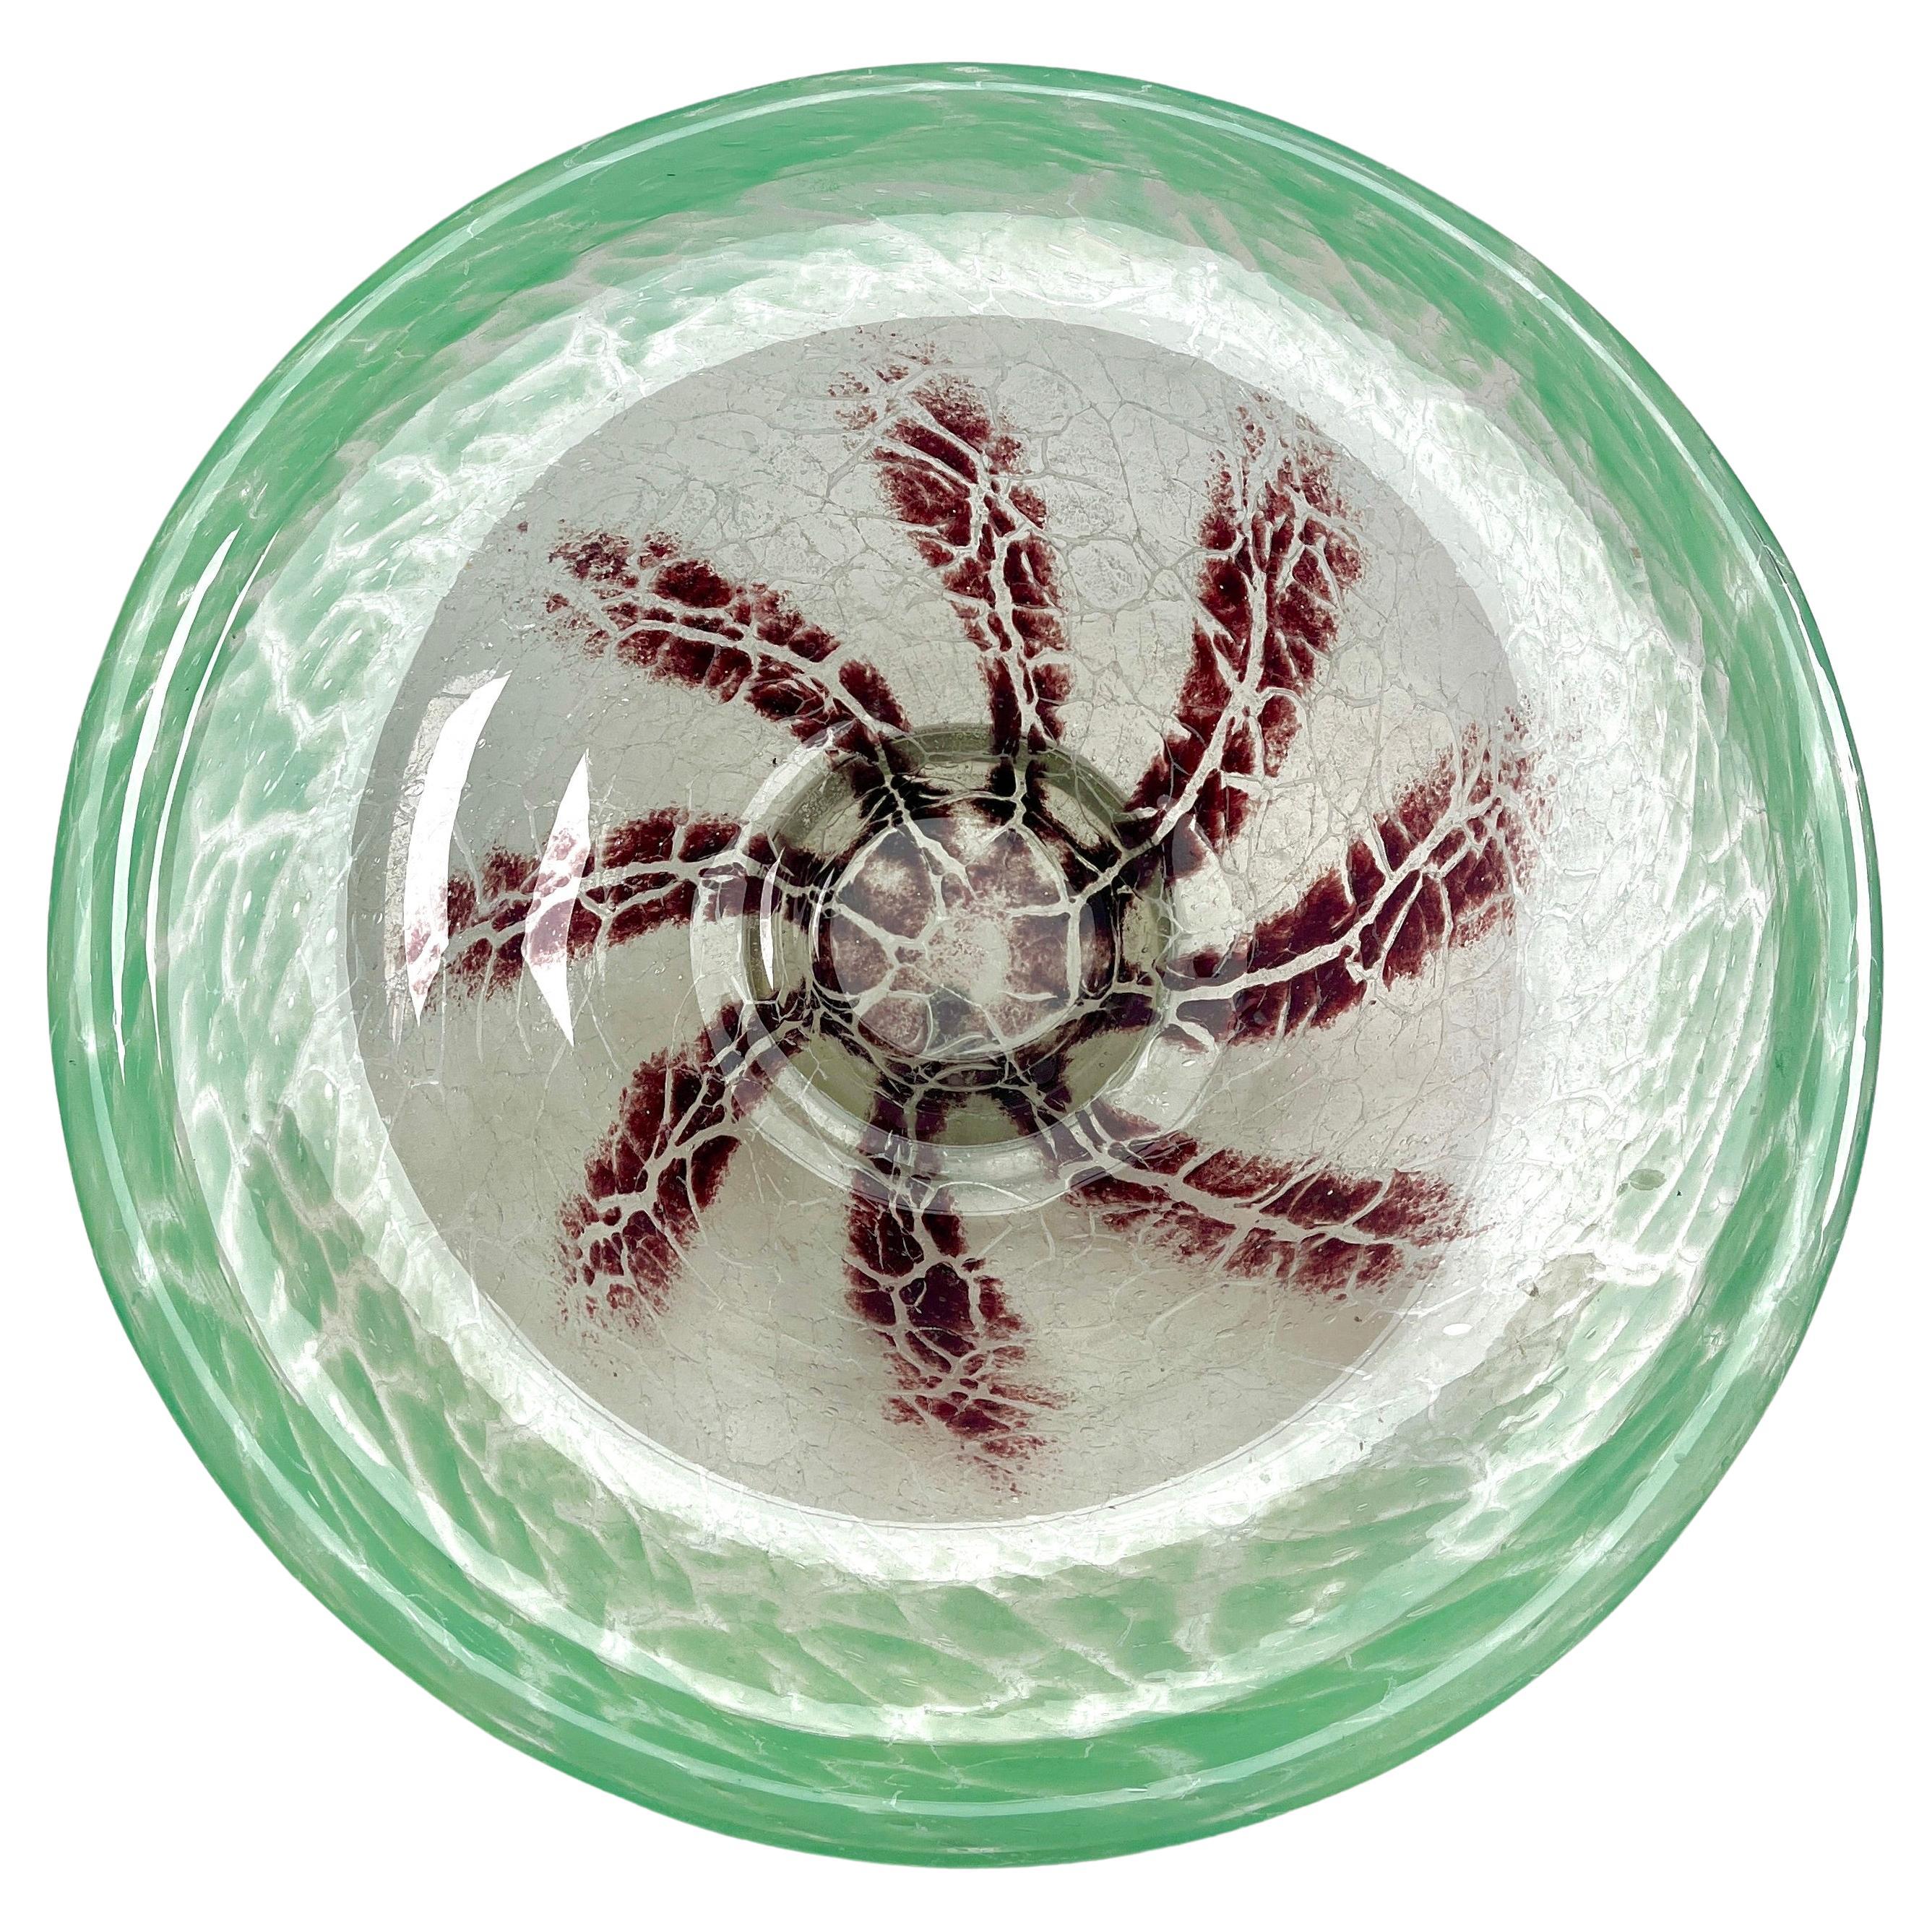 'Ikora' Art Glass Bowl, Produced, by WMF in Germany, 1930s by Karl Wiedmann For Sale